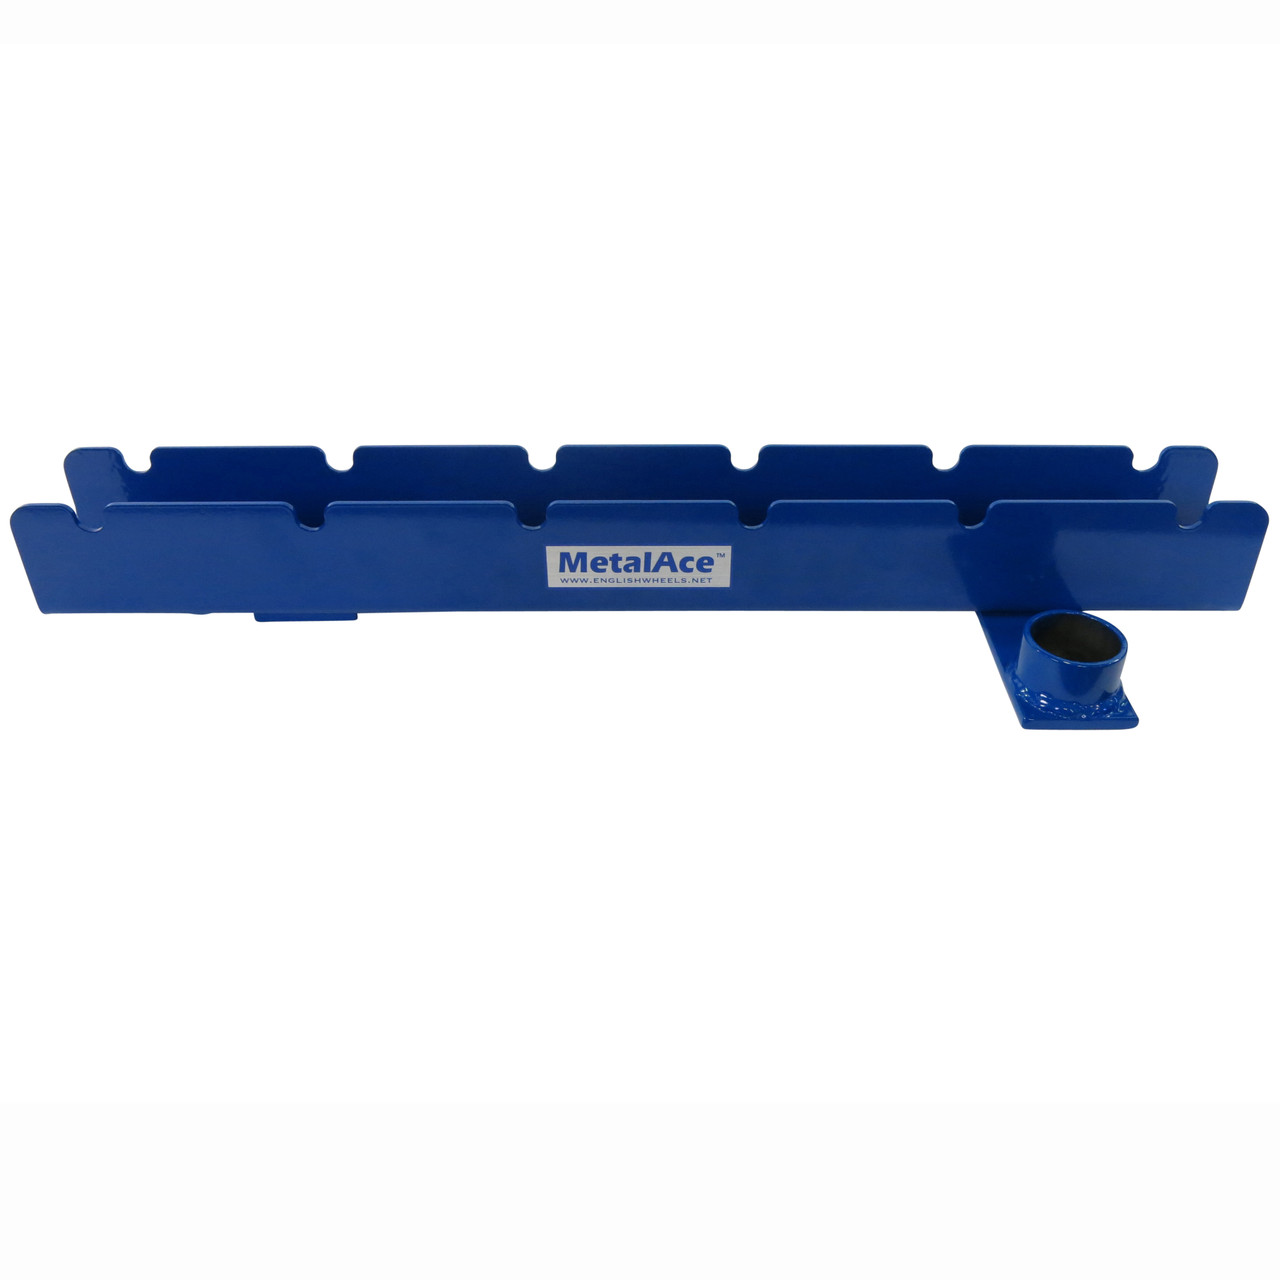 MetalAce 30F and 44F, Optional 2 inch Anvil Tray, Storage